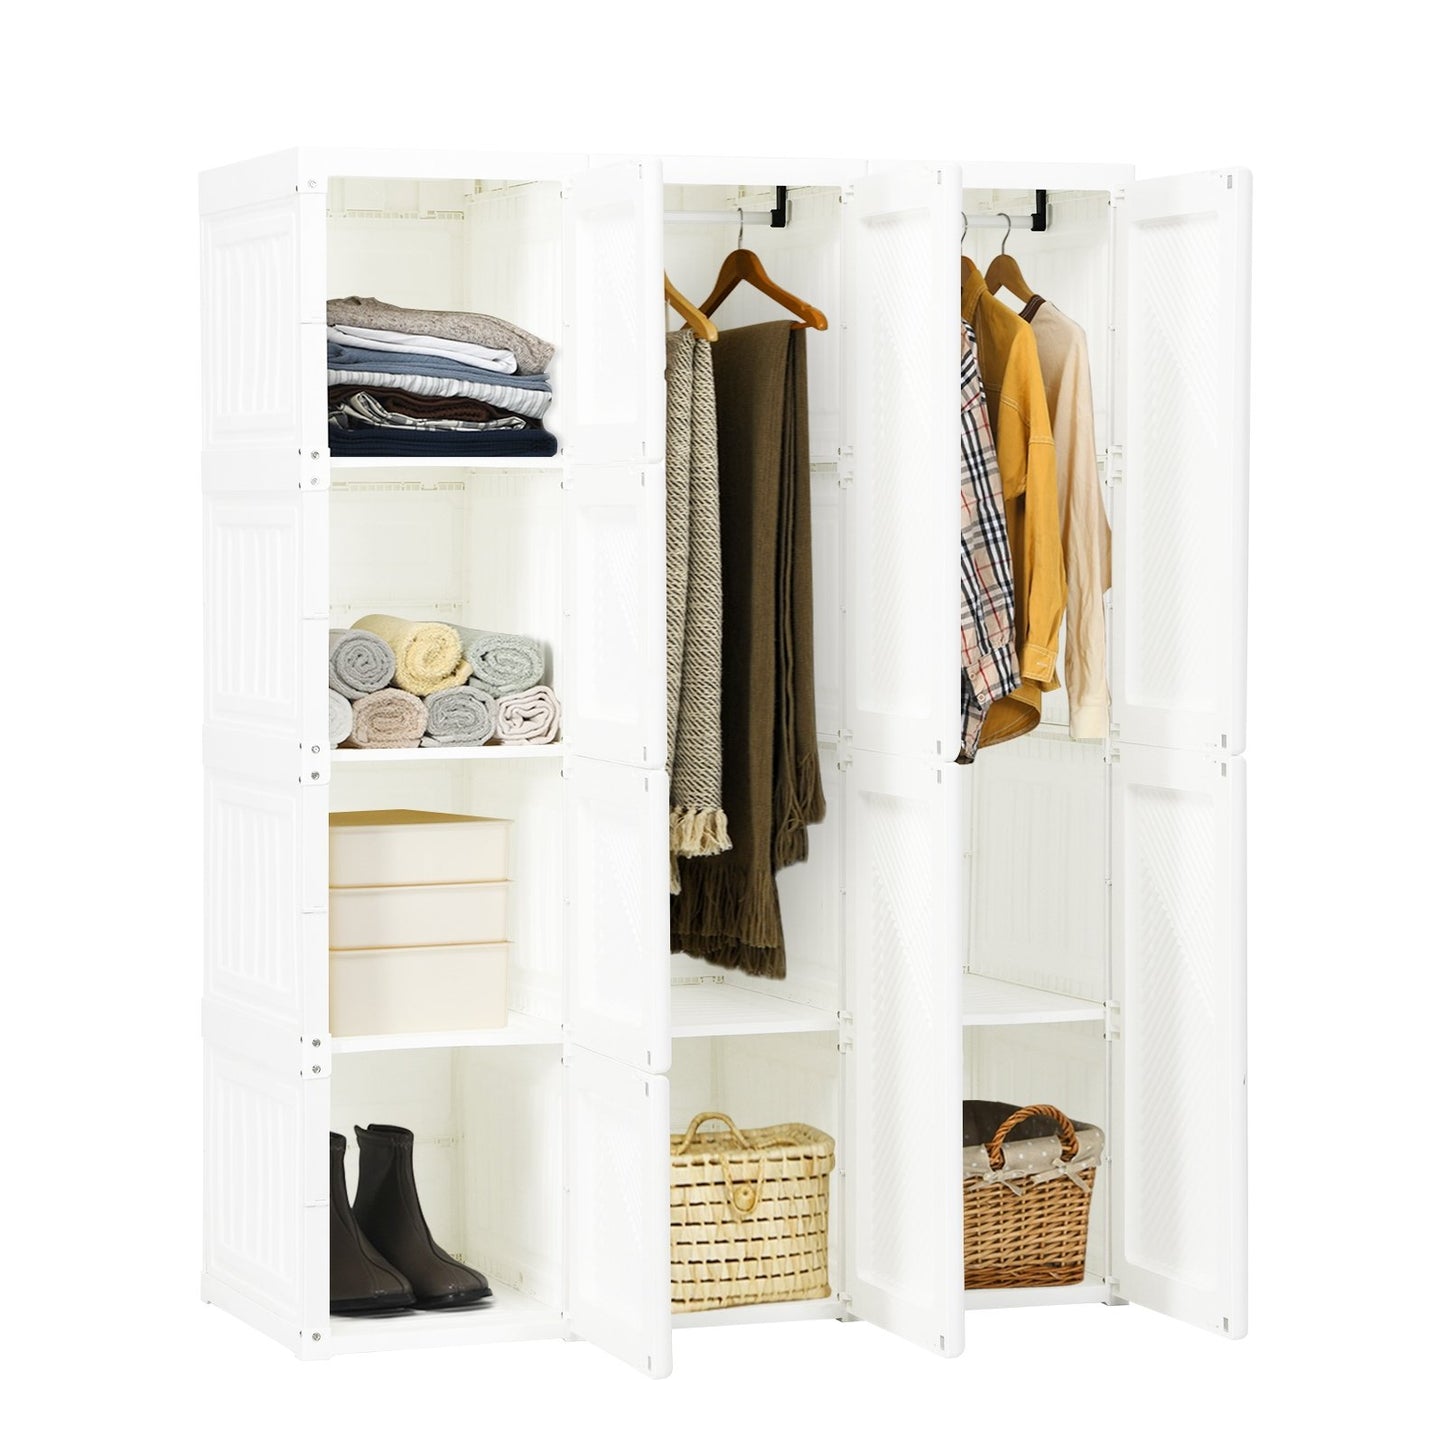 Foldable Closet Clothes Organizer with 8 Cubby Storage, White